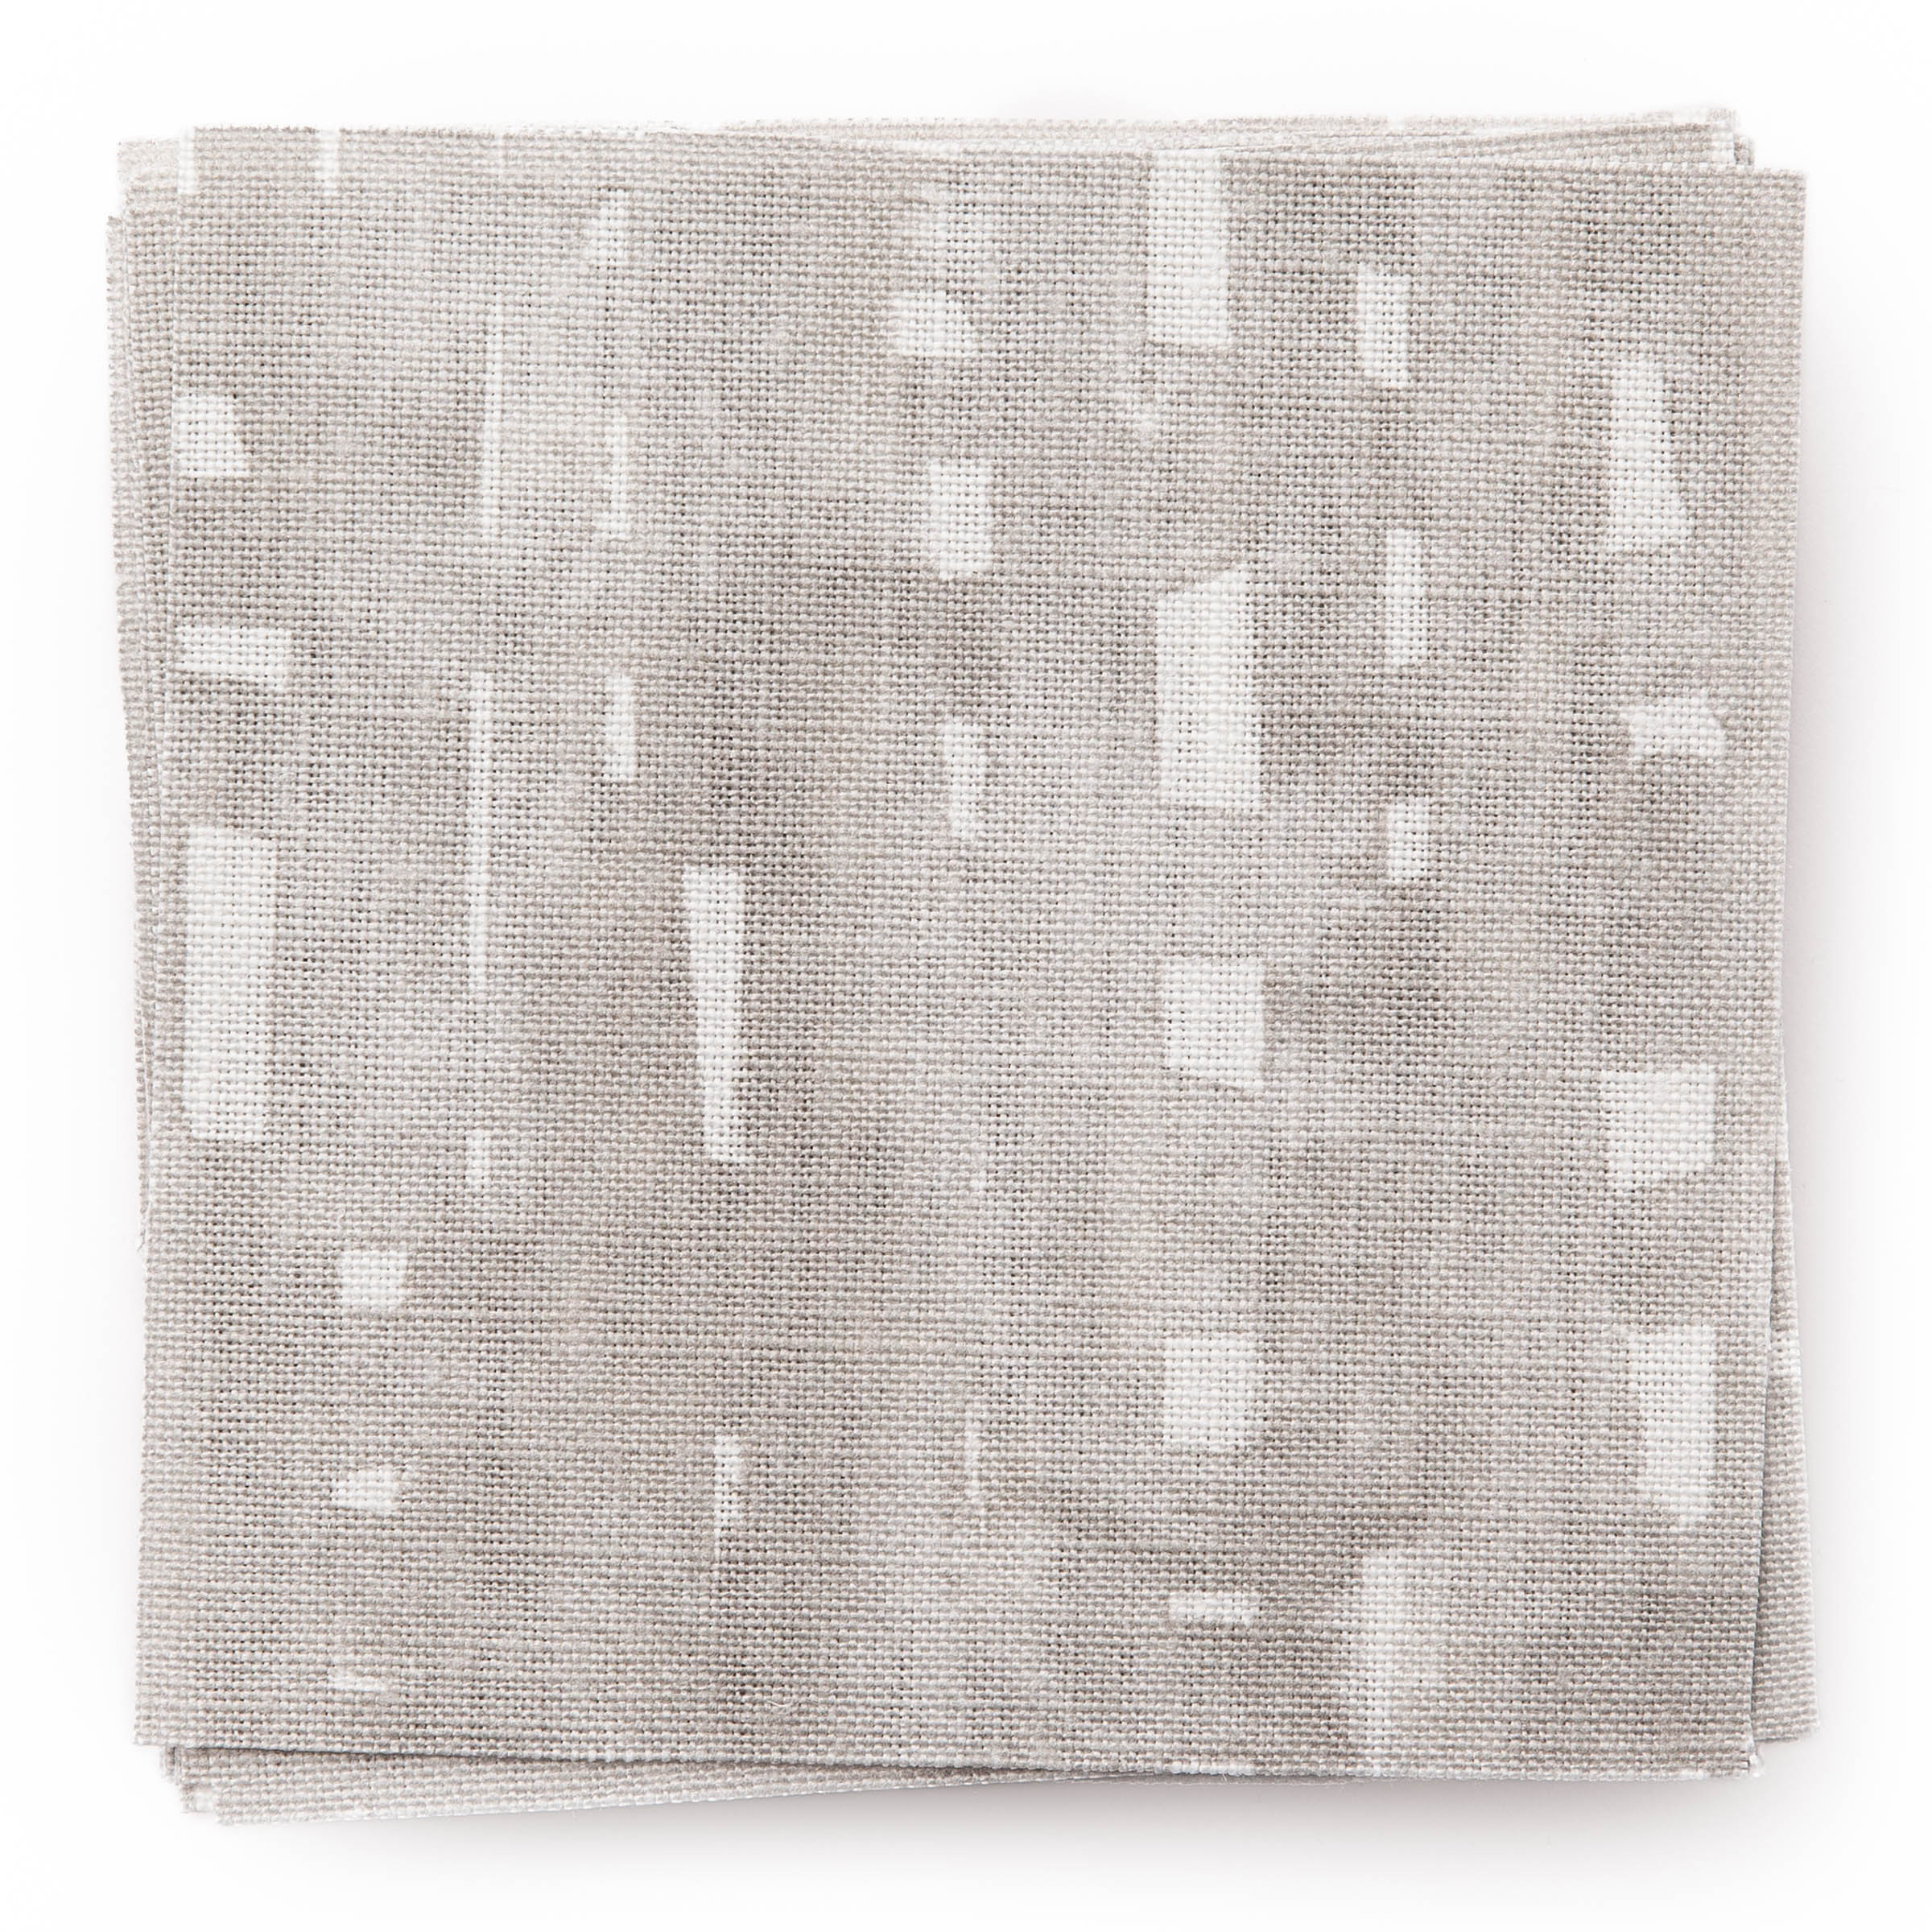 A stack of fabric swatches in a painterly small-scale grid print in gray on a white field.